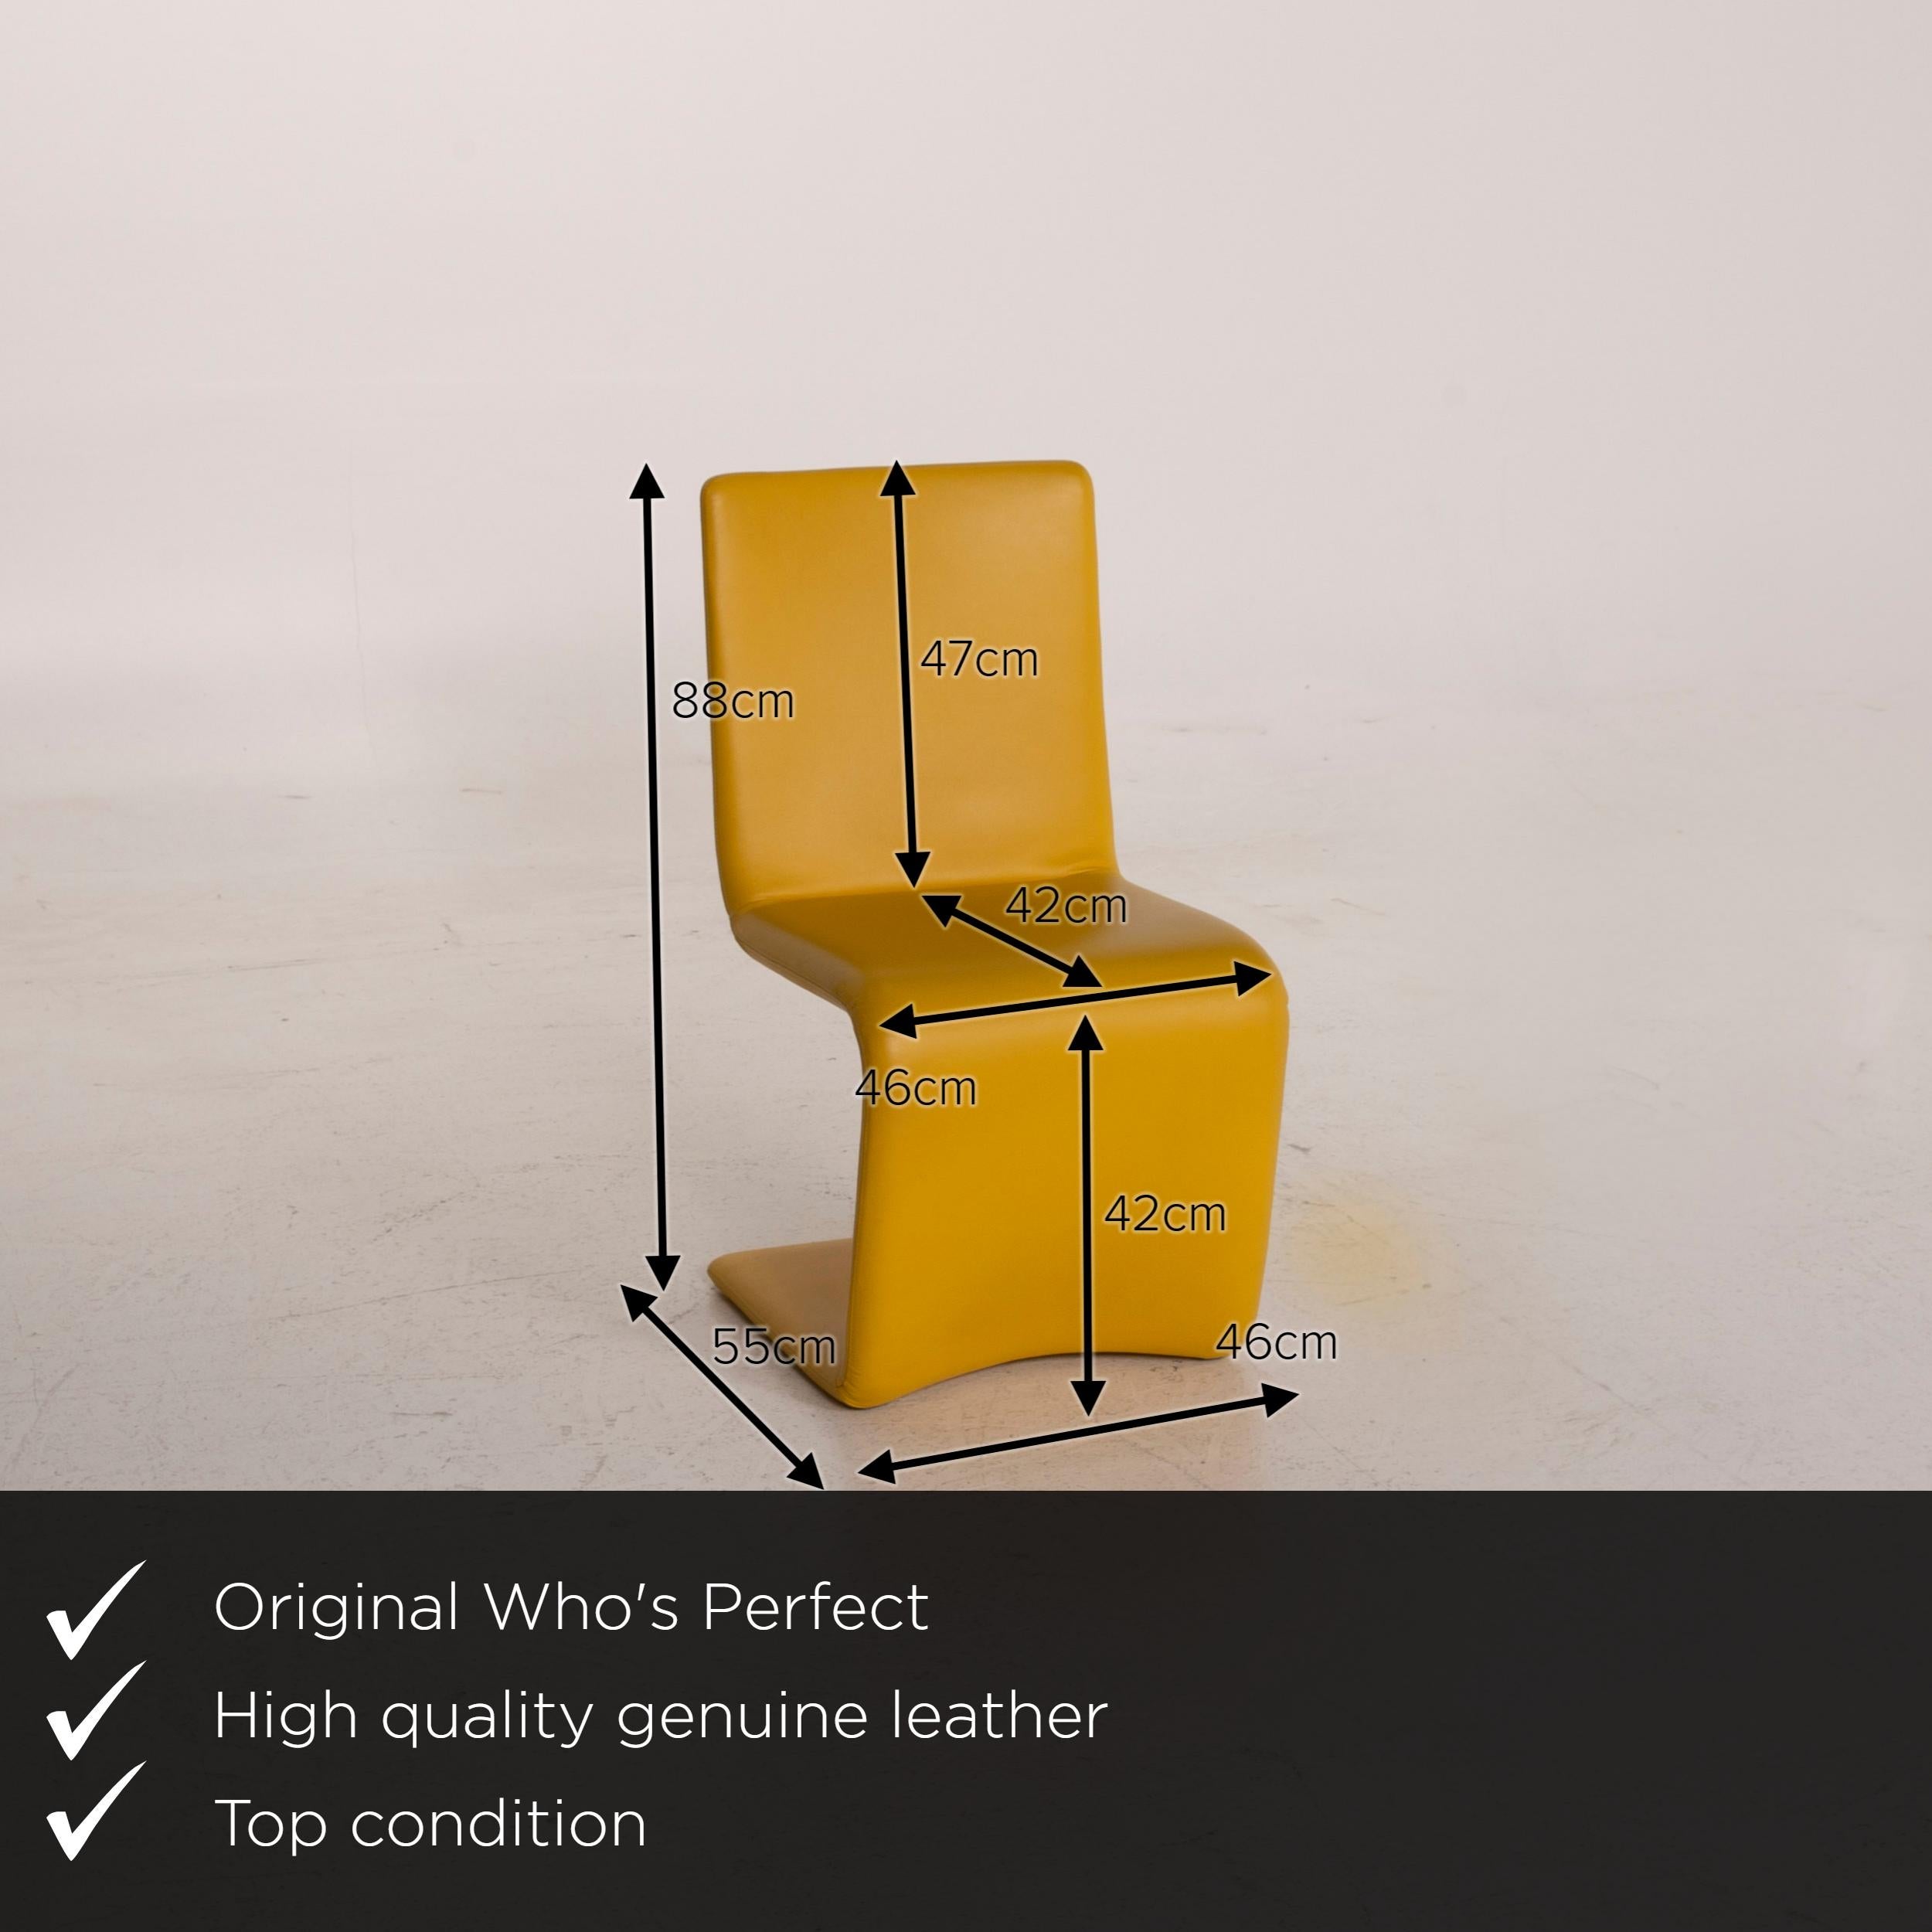 We present to you a Who's Perfect Venere leather chair set Yellow set.
 SKU: #15313
 

 Product measurements in centimeters:
 

 depth: 55
 width: 46
 height: 89
 seat height: 47
 rest height: 
 seat depth: 42
 seat width: 46
 back